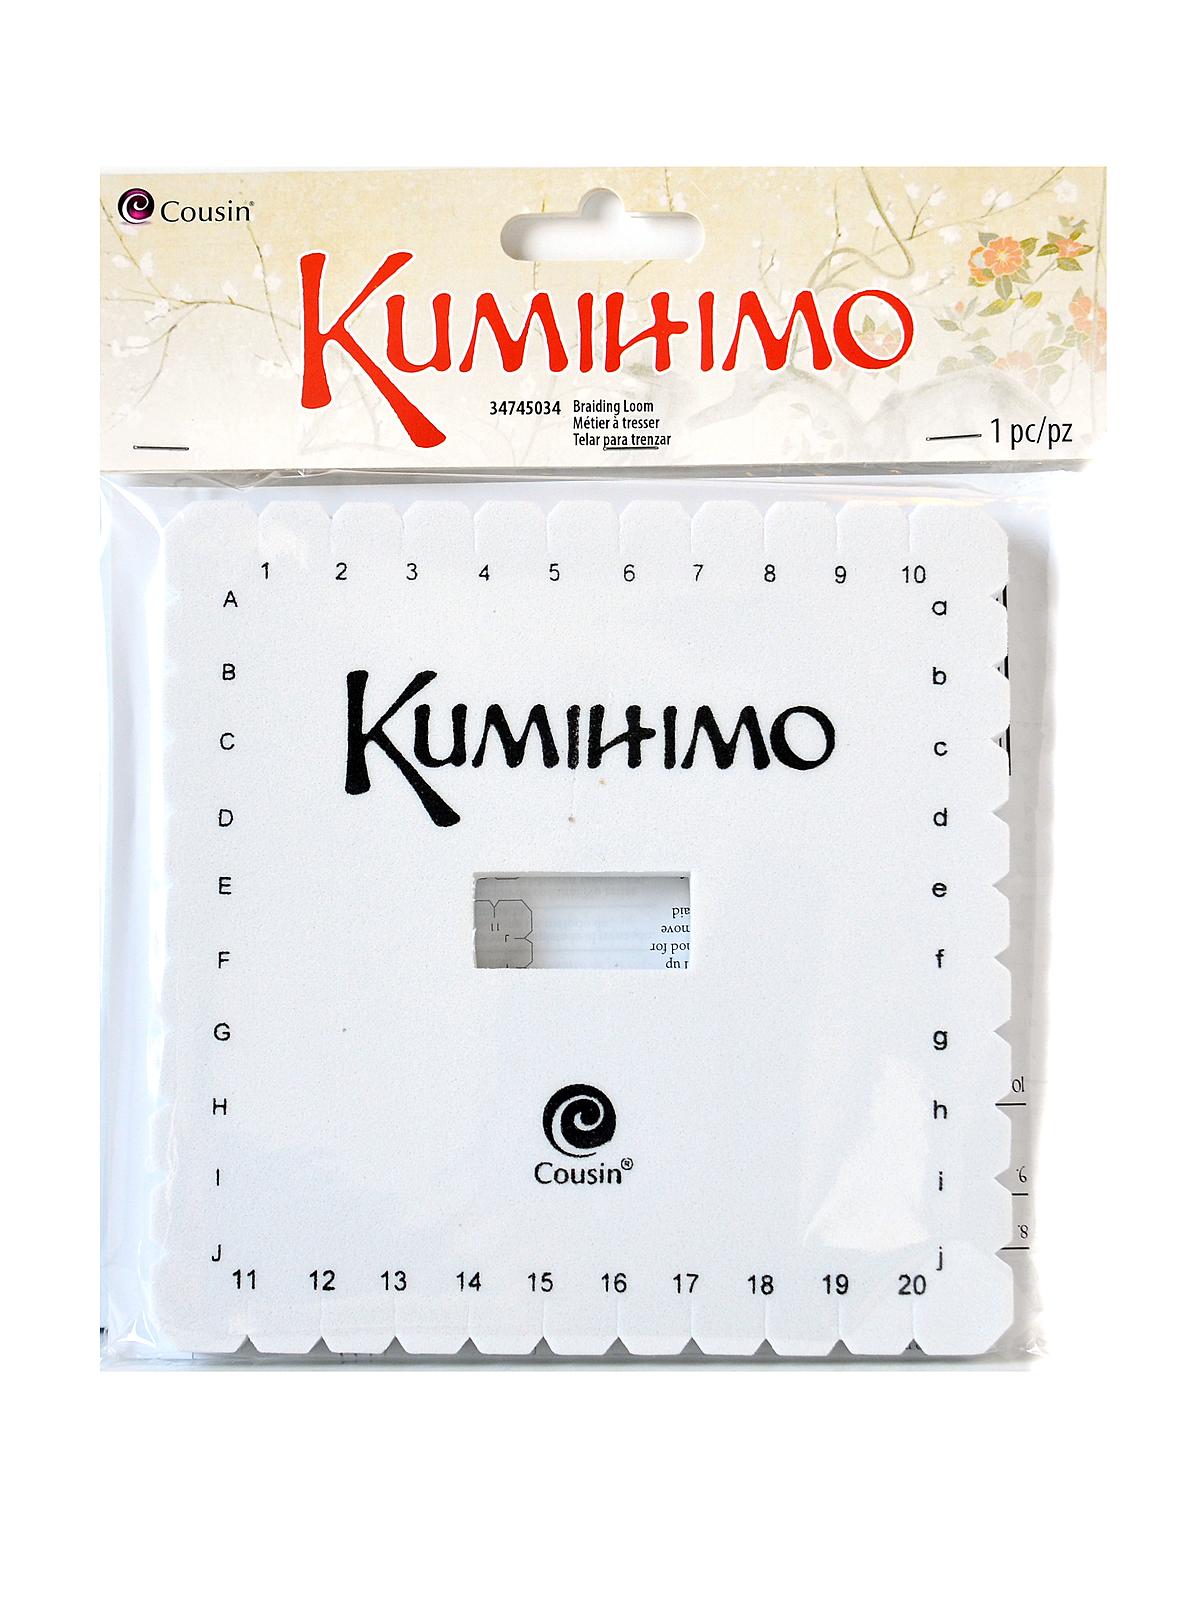 Kumihimo Discs Square Each